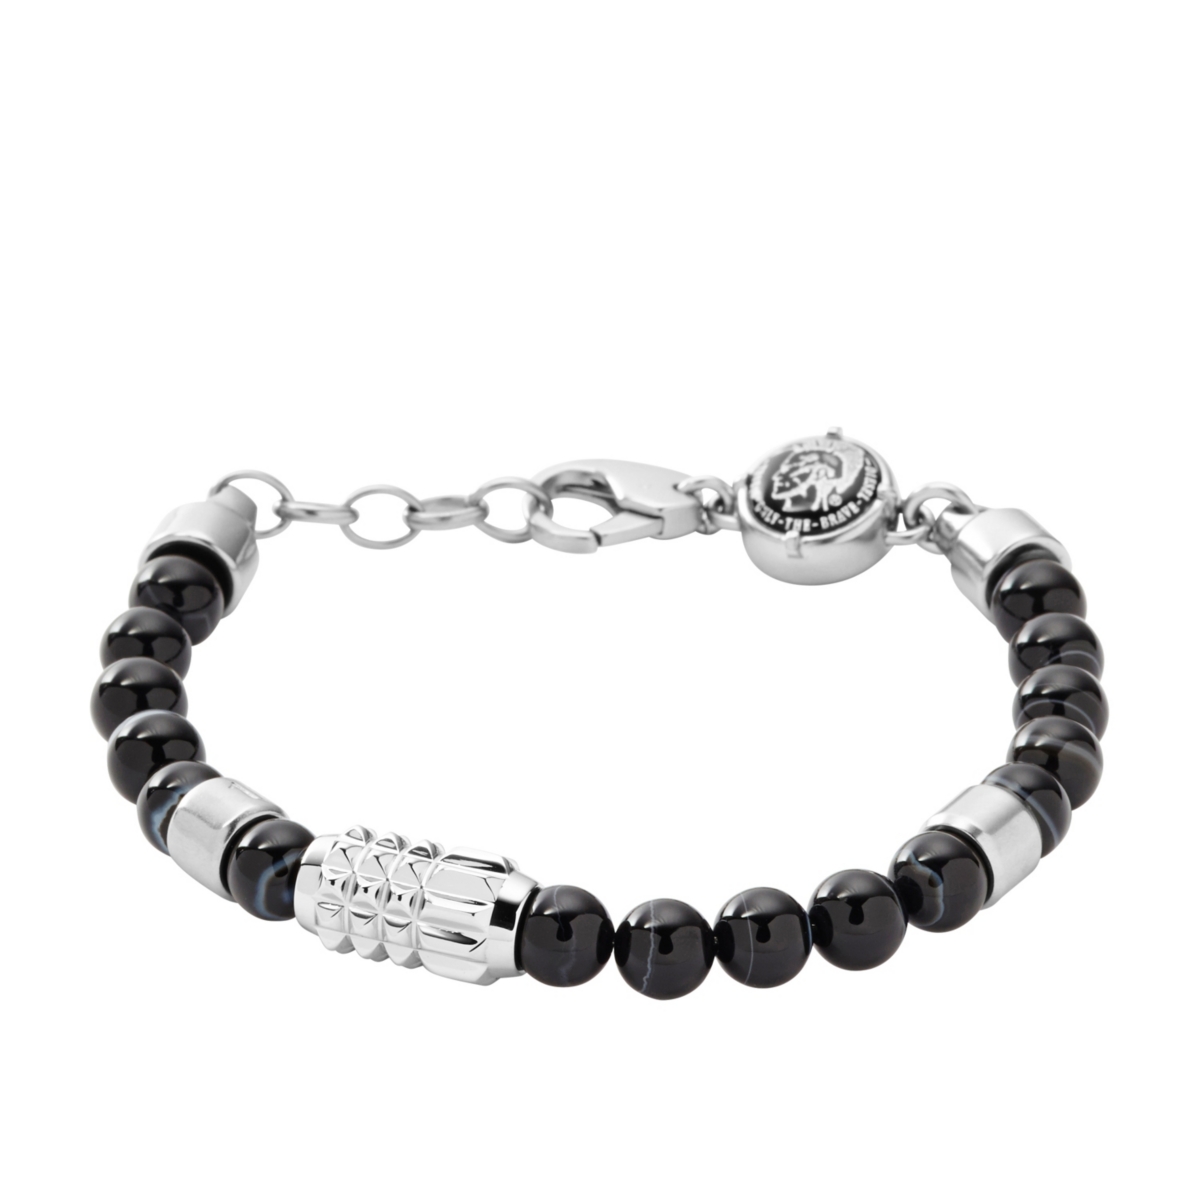 Men's Silver Tone and Black Agate Stainless-Steel Beaded Bracelet - Silver